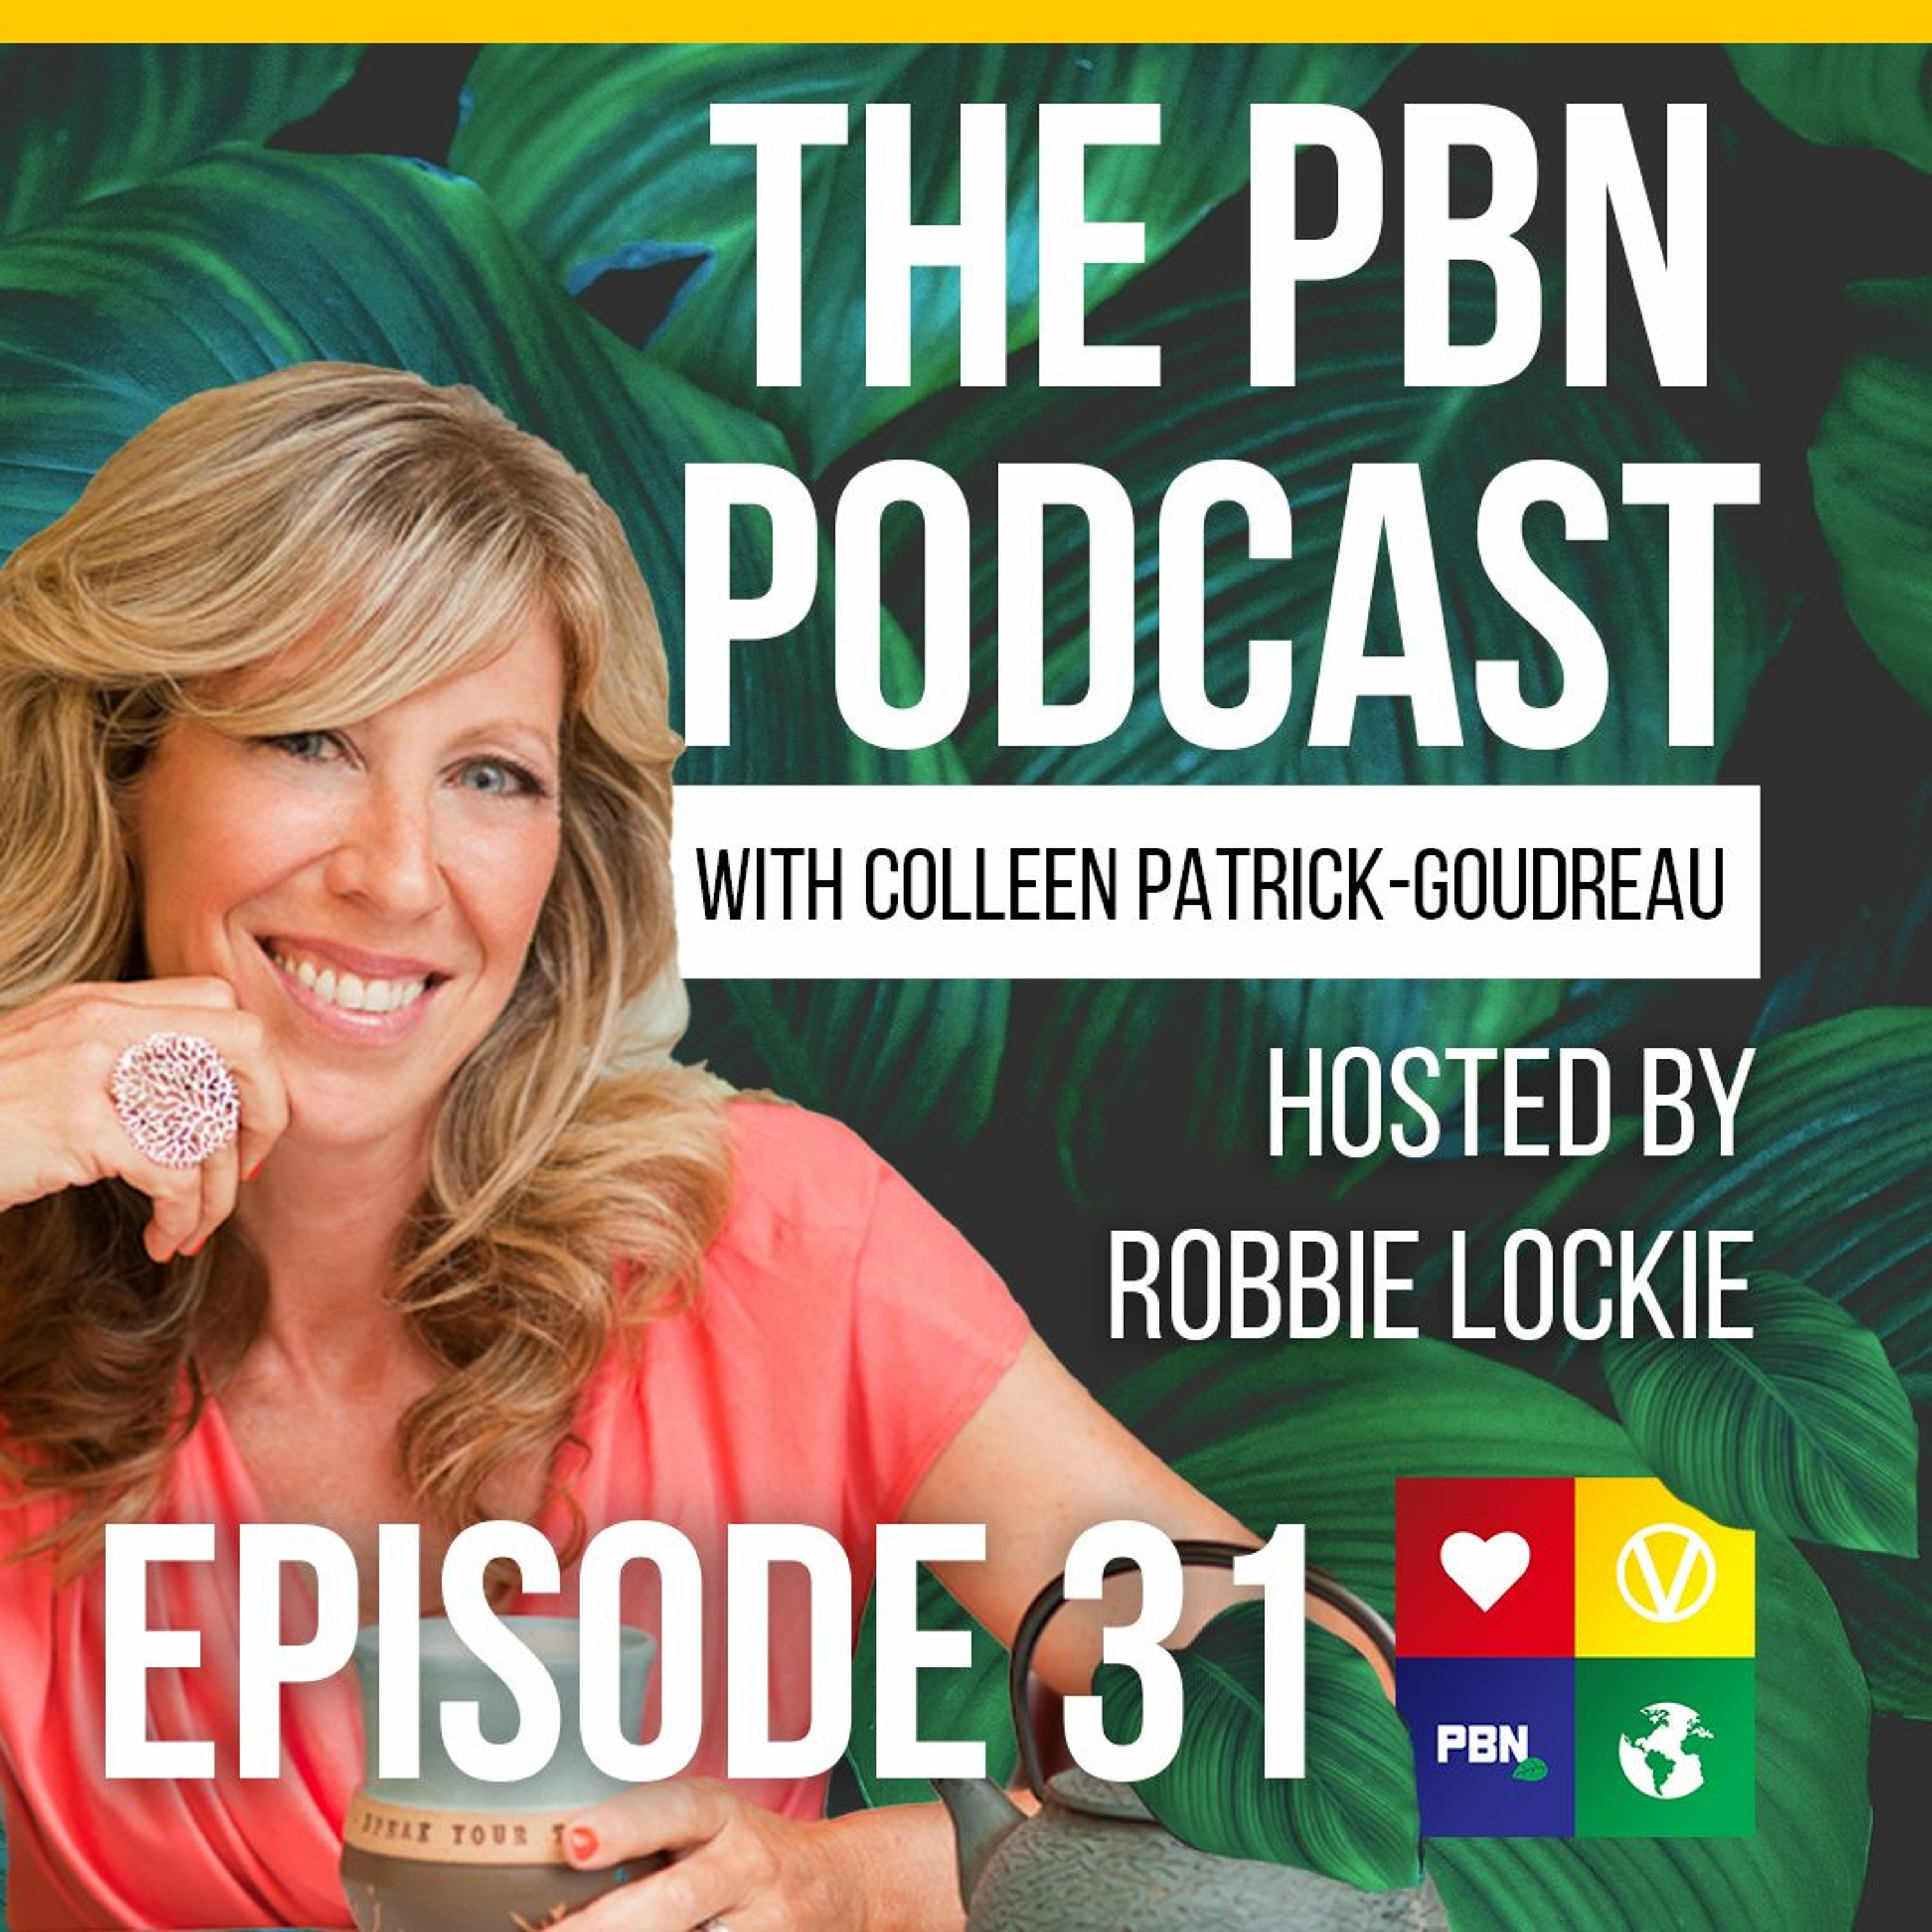 The Joyful Vegan Shares Her Story. | Interview /w Colleen Patrick- Goudreau Episode 31